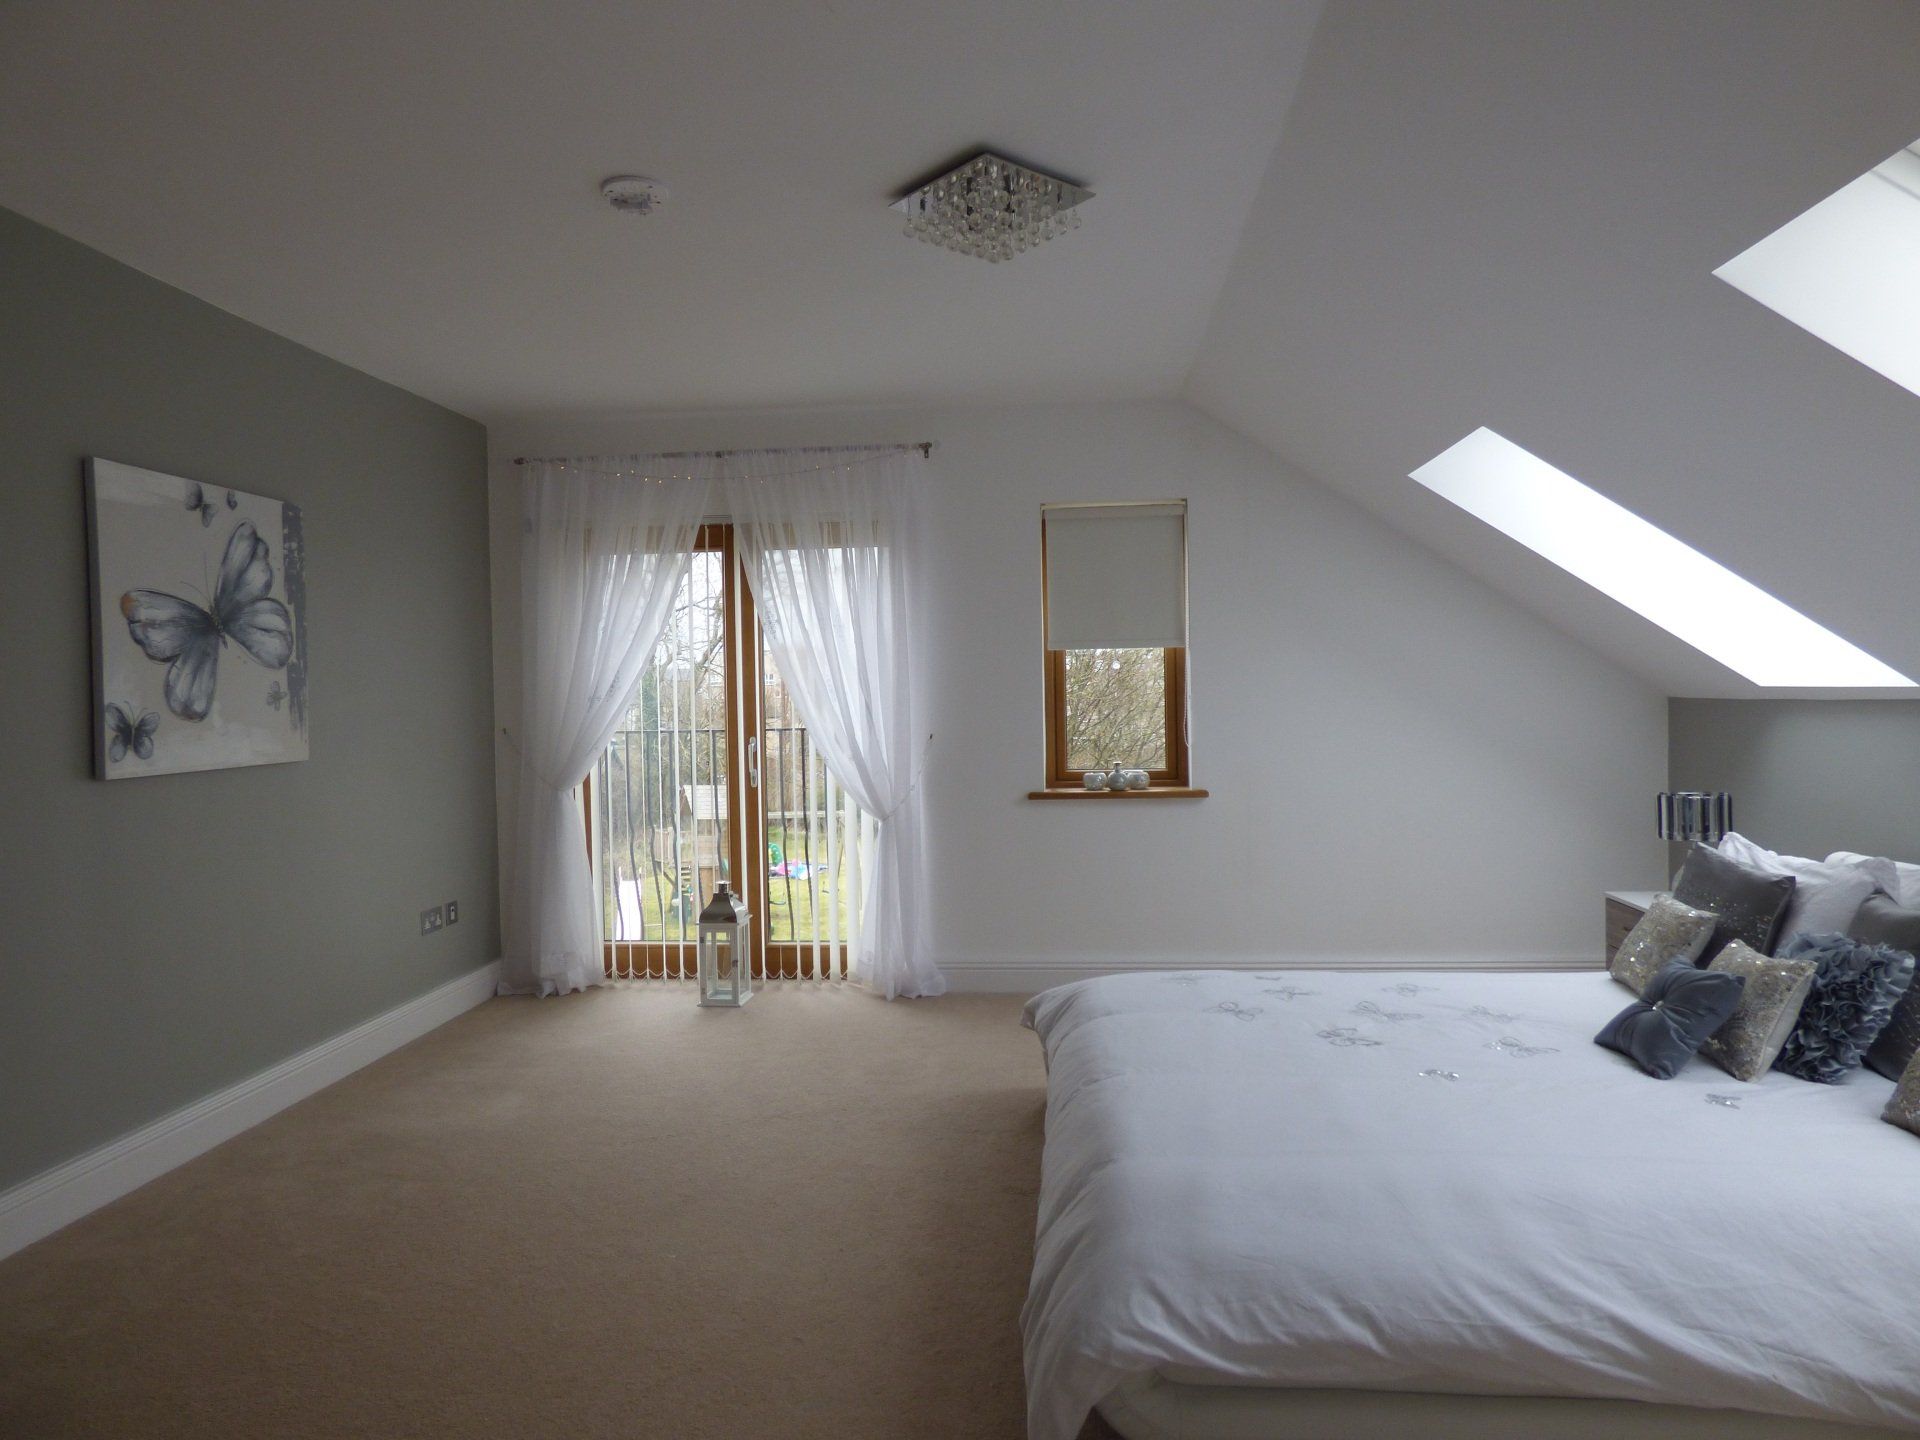 Picture of an attic bedroom painted in white  by Elite Edge Painters and Decorators Manchester